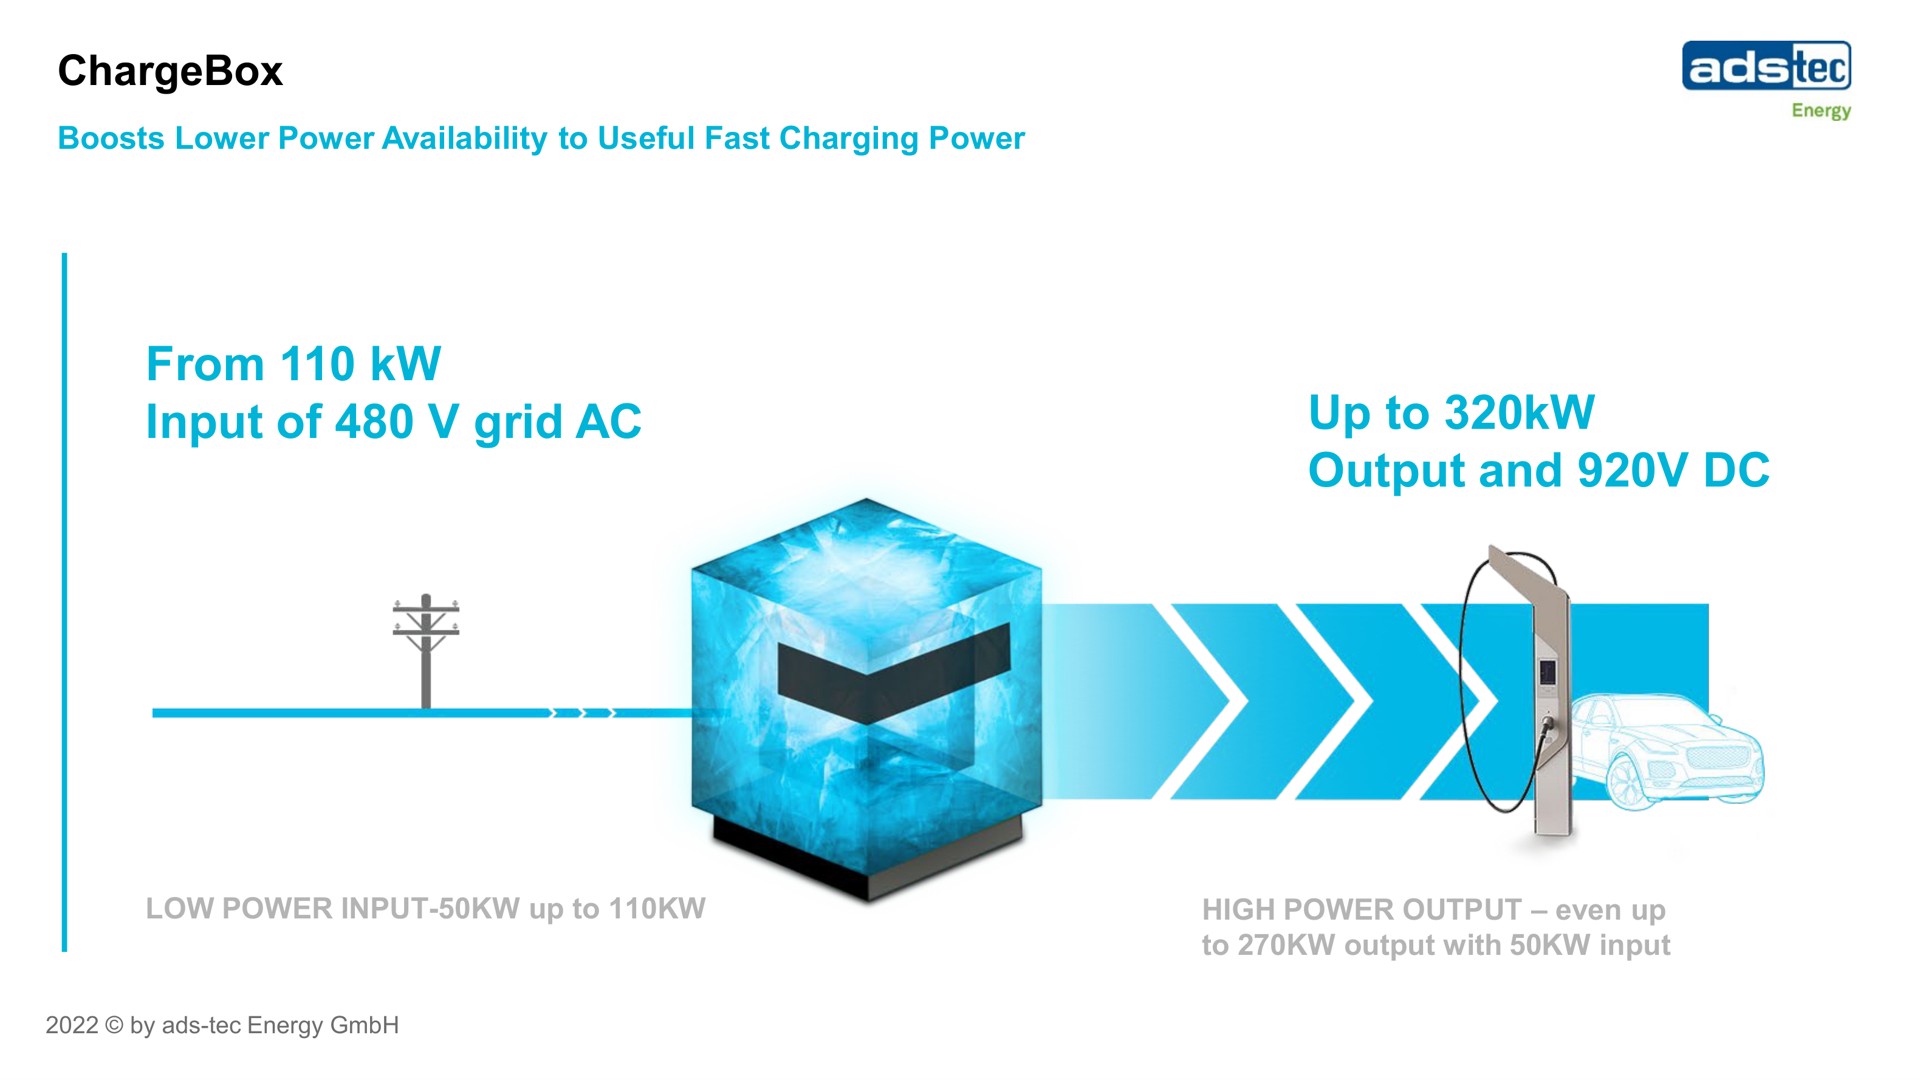 ads tec energy from input of grid up to output and | ads-tec Energy